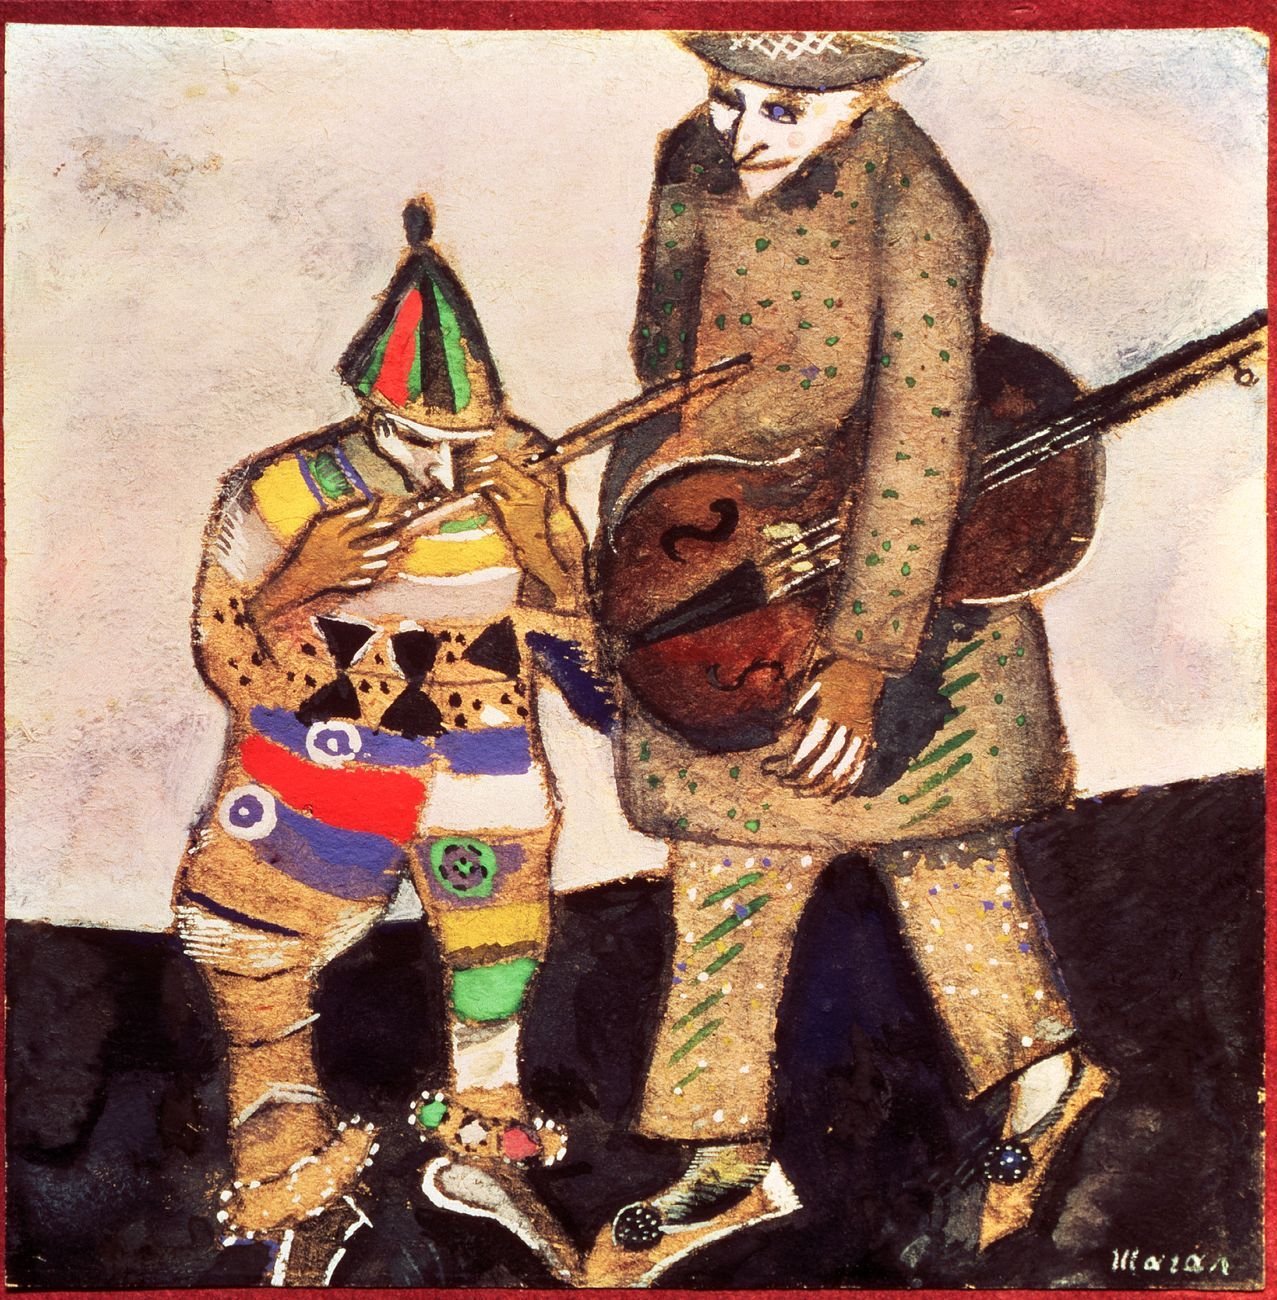 Marc Chagall, I musicanti, 1911 ca. Galleria Statale Tret’jakov di Mosca © The State Tretyakov Gallery, Moscow, Russia © Chagall ®, by SIAE 2018